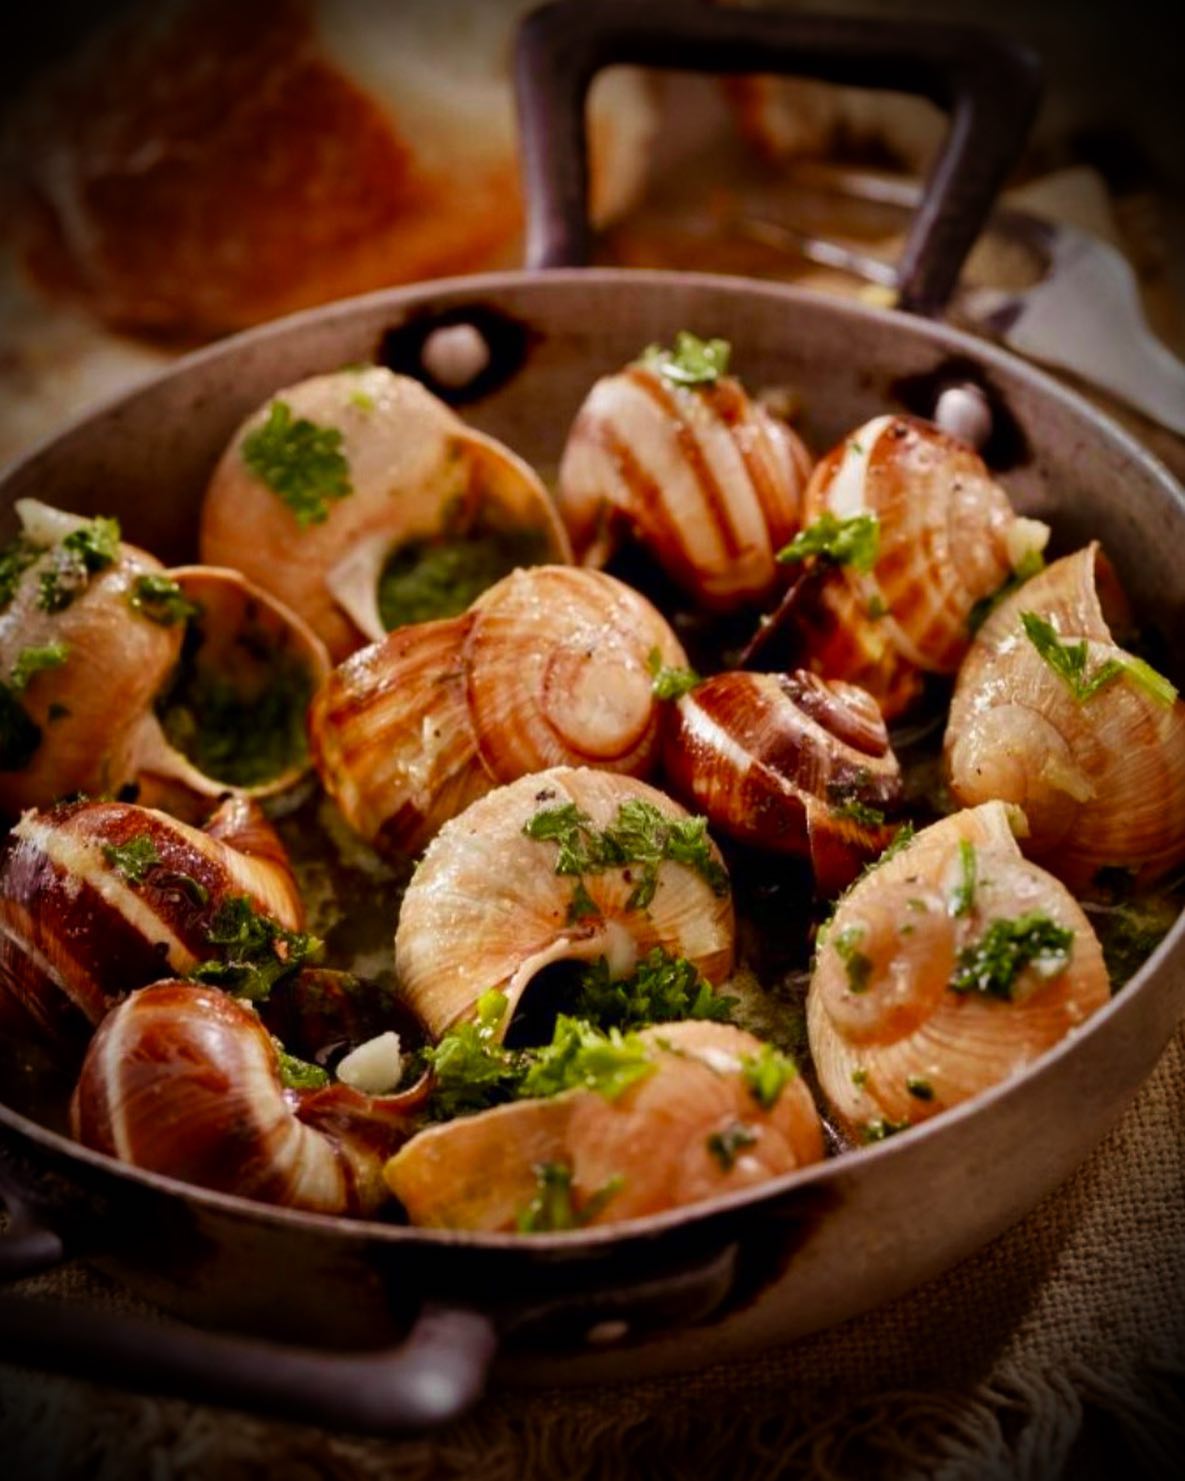 Escargot - Fresh snails served in our beautiful garlic butter, come & give this gorgeous starter a try…. 🐌🧄

#snails #escargot #mediterranean #french #bhamfoodie #bhamfood #foodblogger #brumbloggers #jq #jewelleryquarter #birmingham